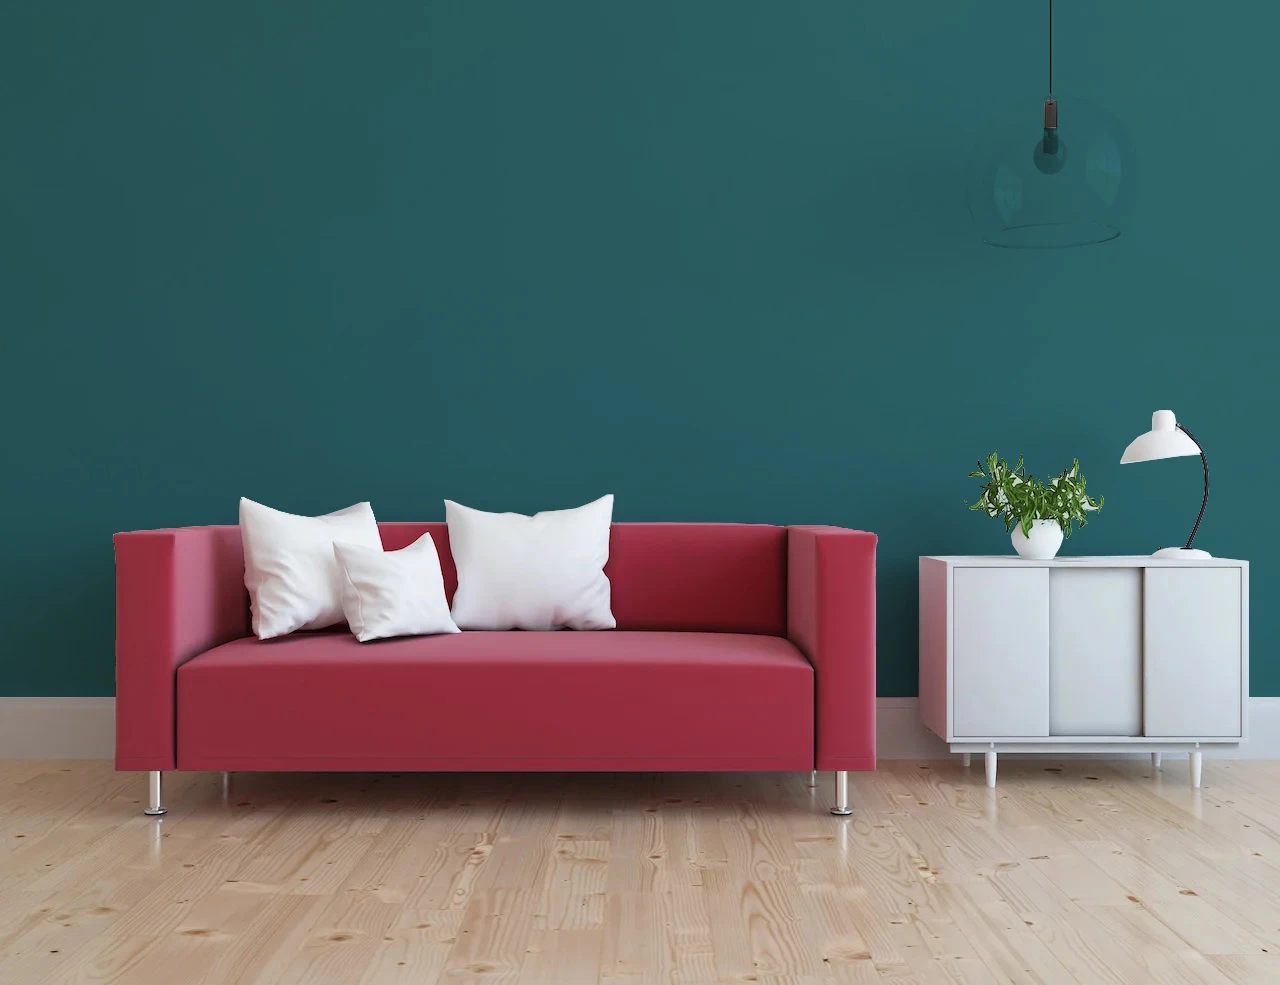 teal walls with red couch